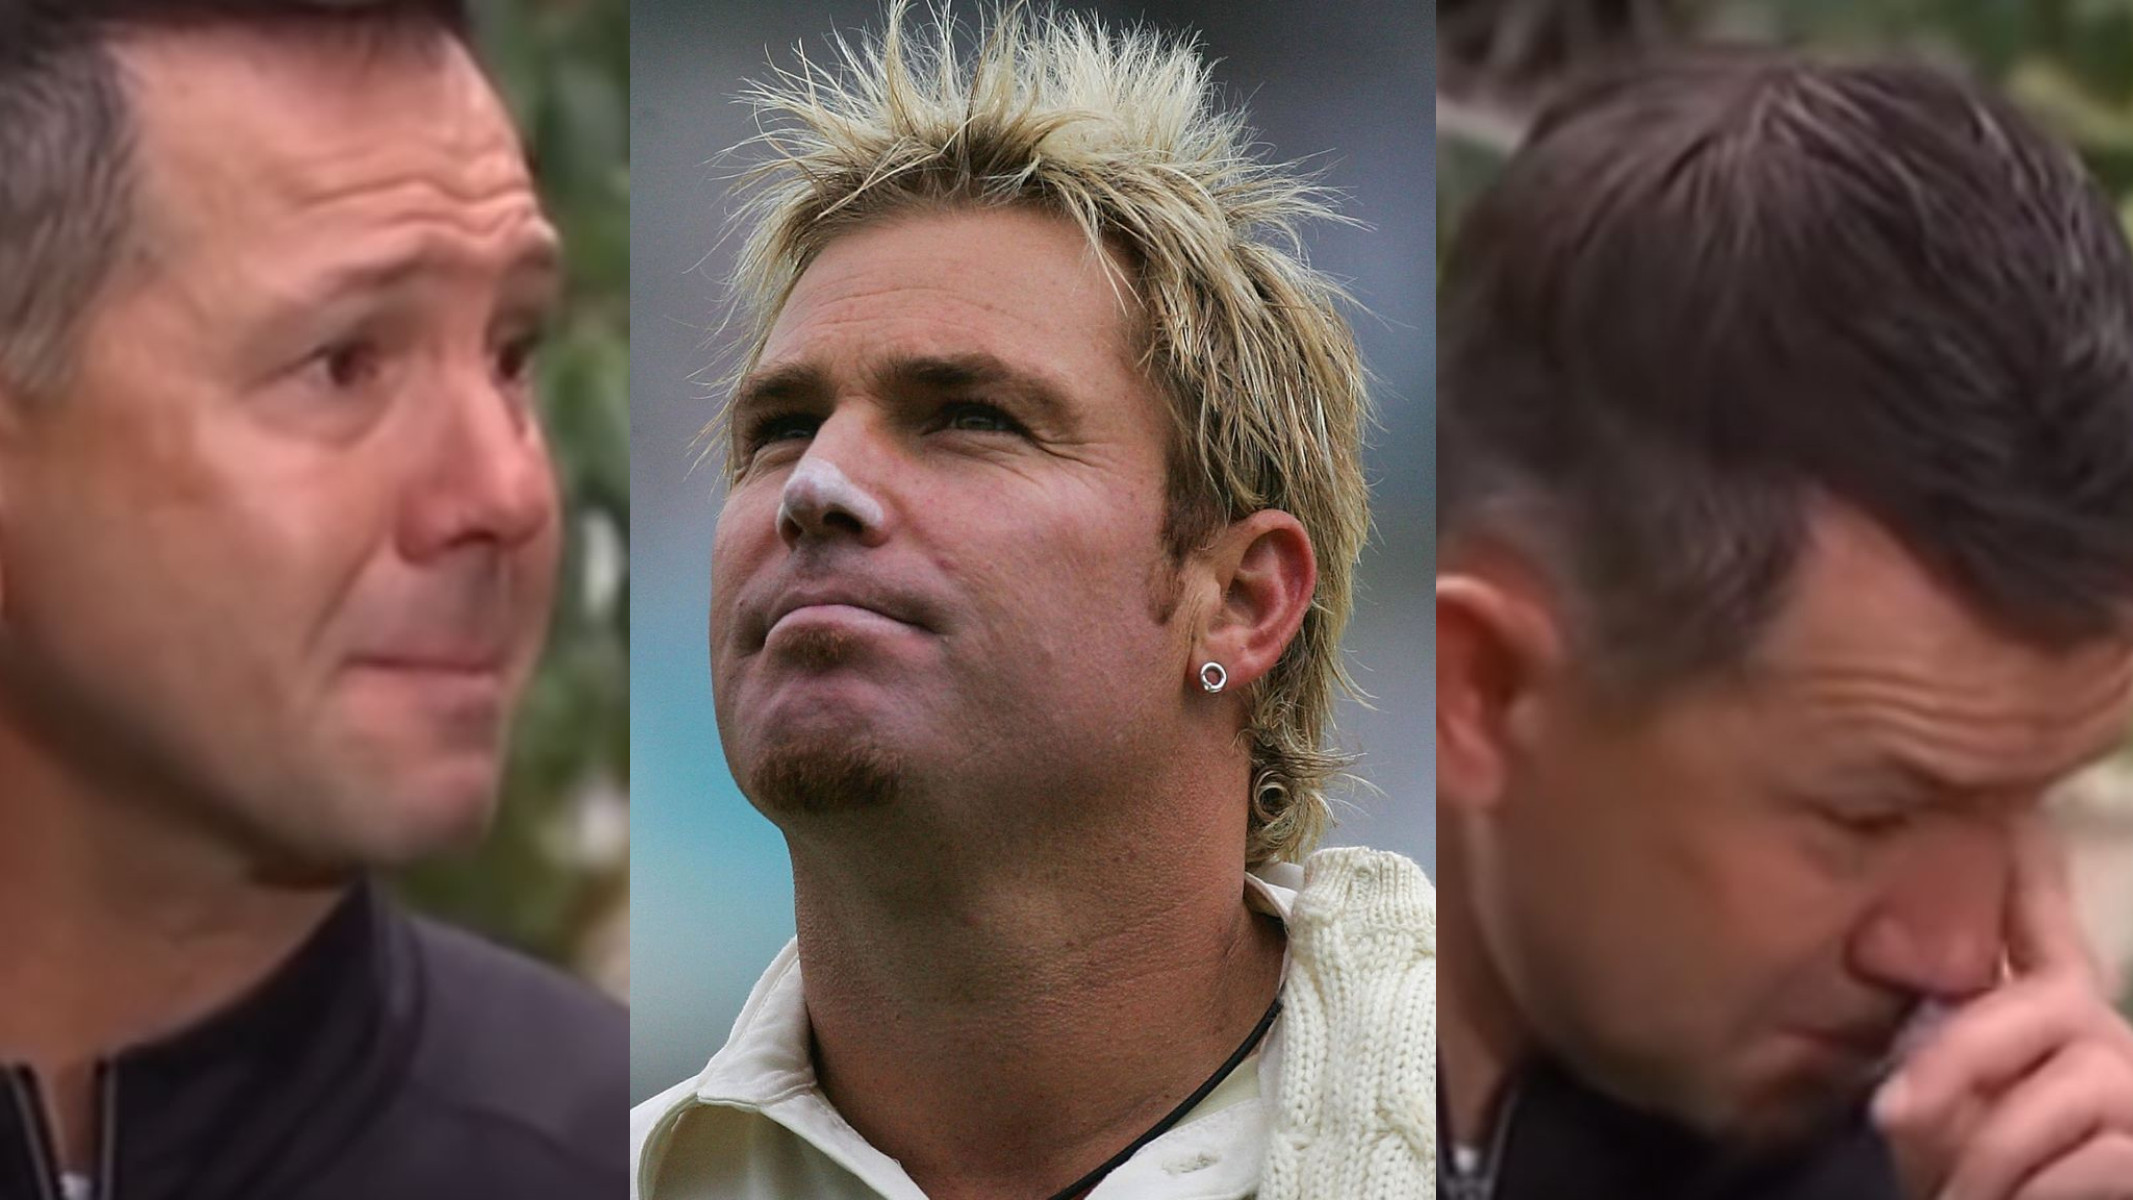 WATCH- Ricky Ponting breaks down in tears while paying an emotional tribute to Shane Warne